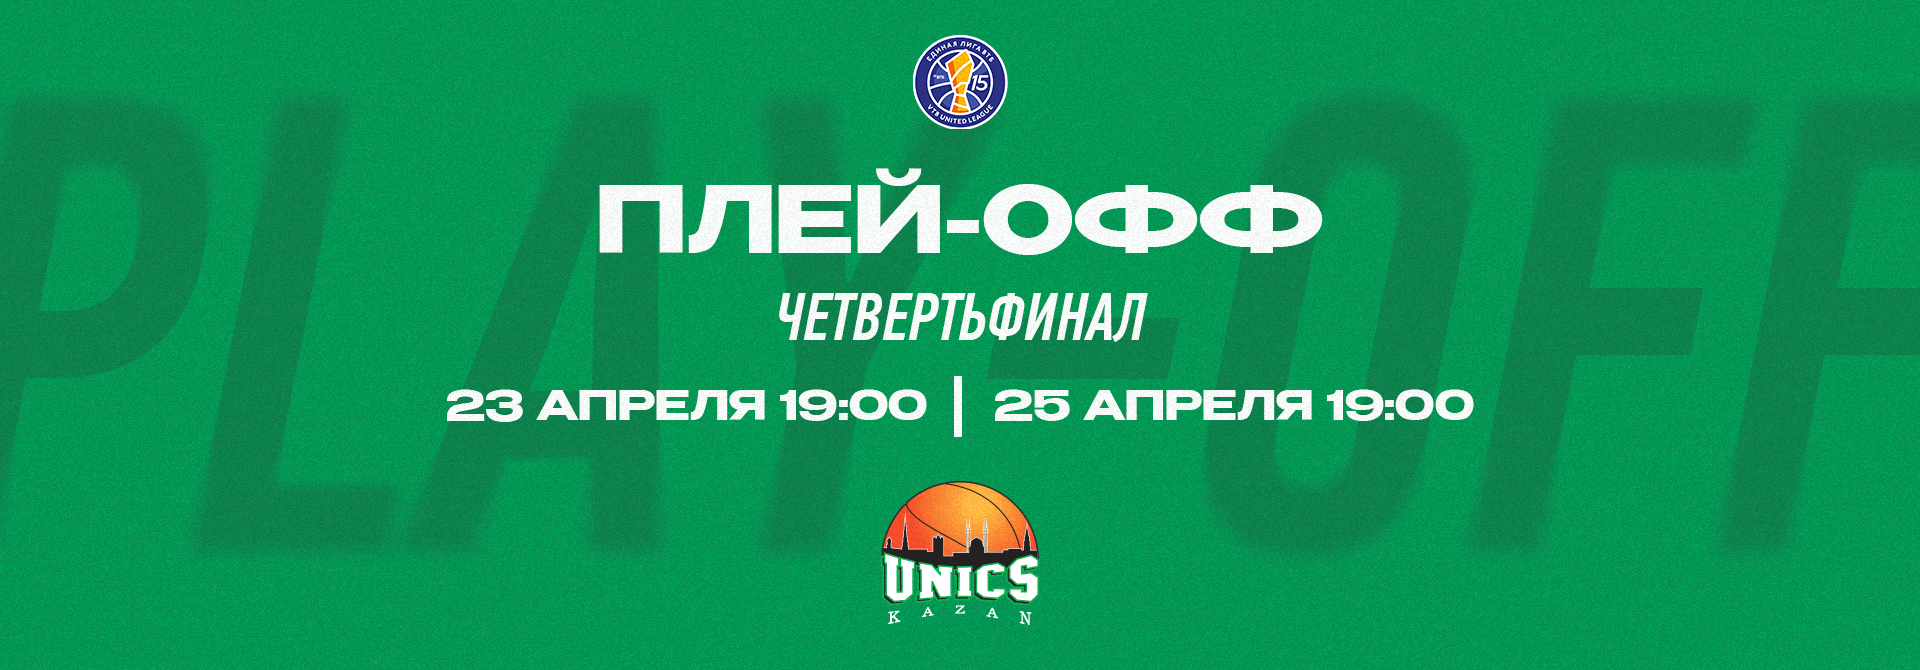 The schedule of UNICS matches in the quarterfinals